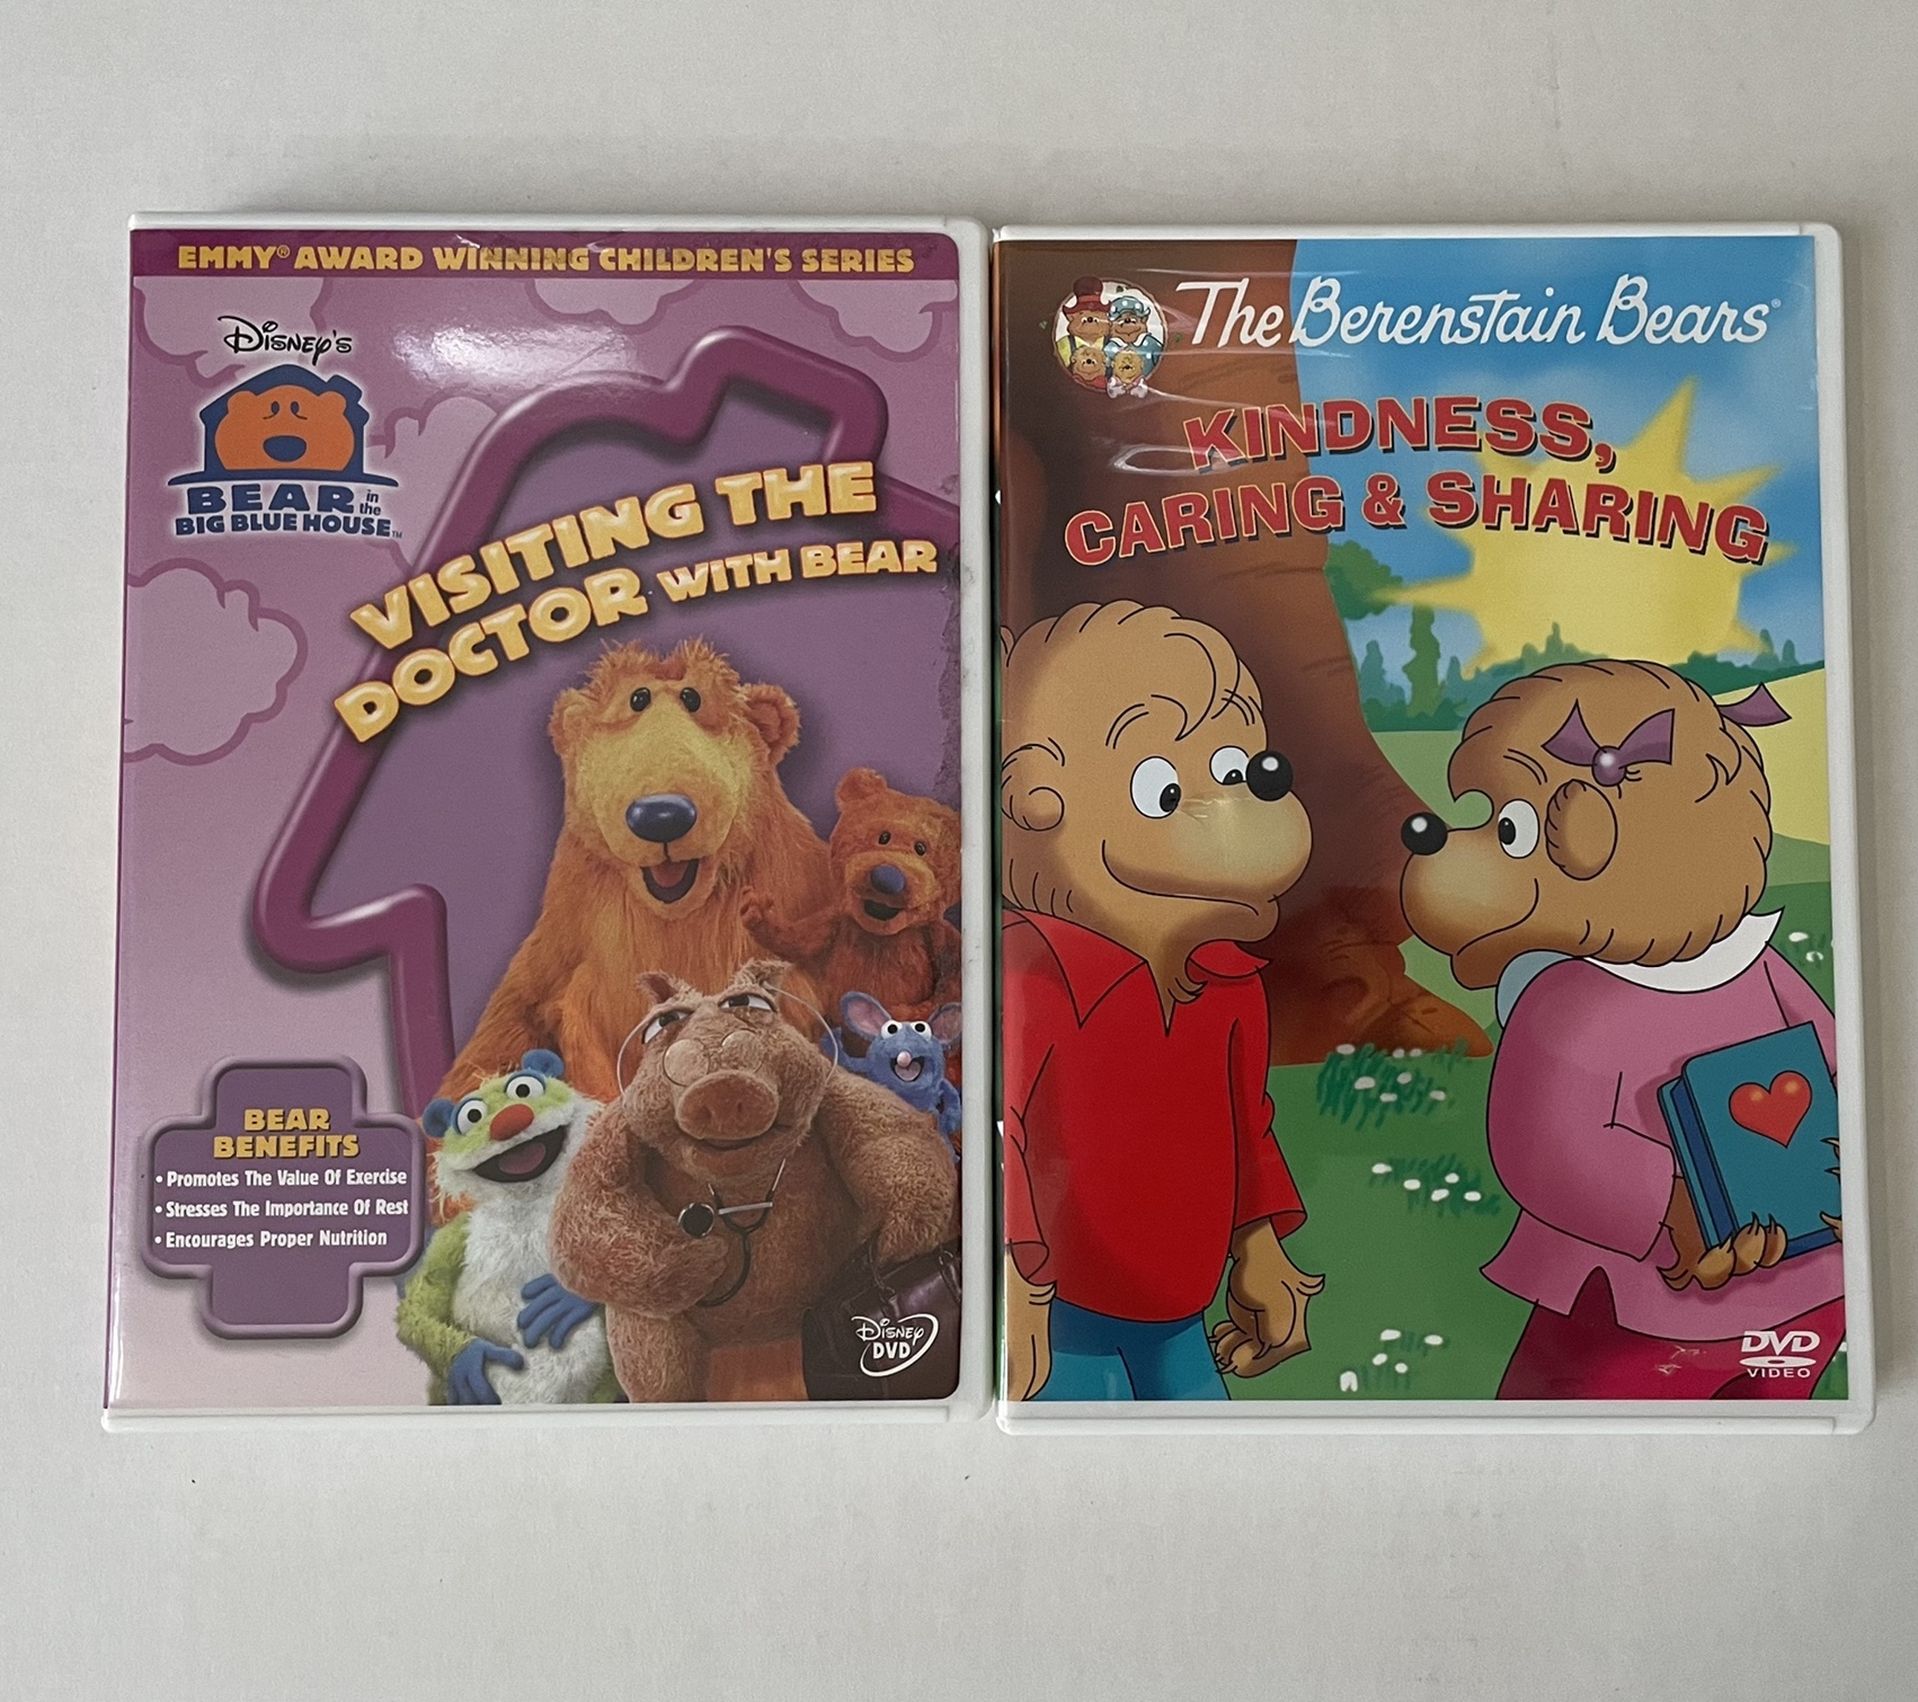 Berenstain Bears and Bear in The Big Blue House Kids Learning DVDs -$5